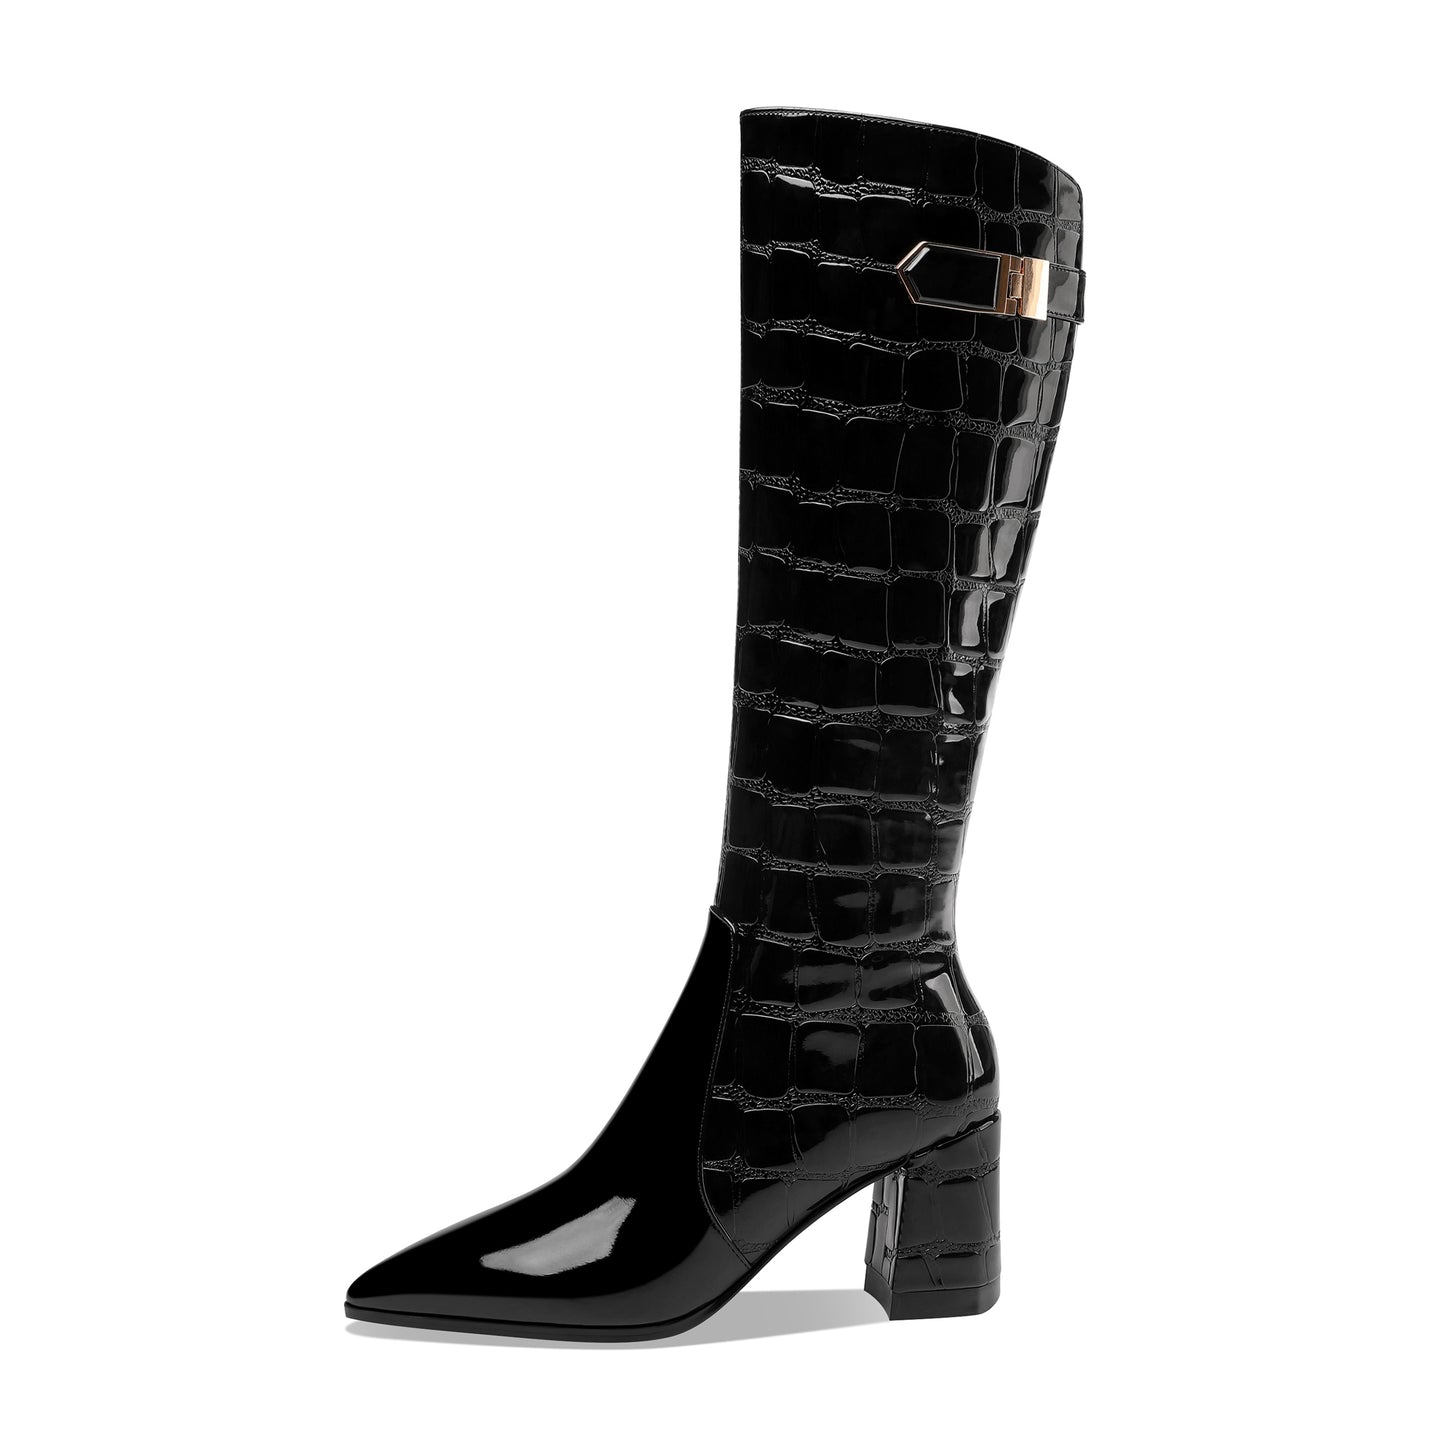 TinaCus Handmade Women's Patent Leather Pointed Toe Side Zip Up Block Heel Classic Black Knee High Boots with Chic Buckle